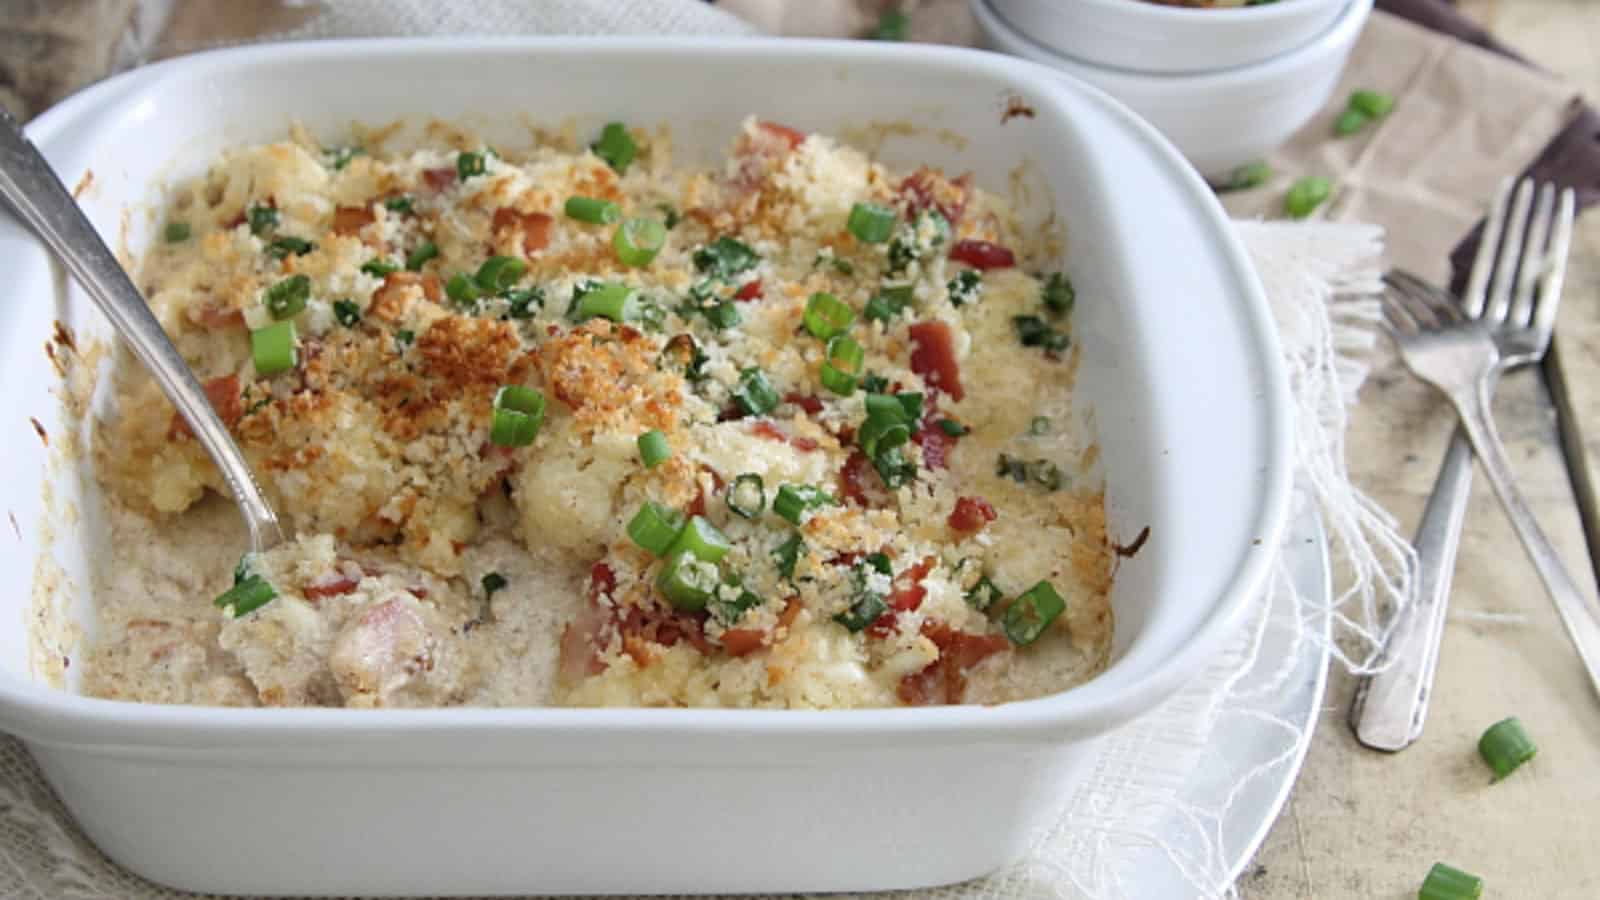 Cauliflower bacon gratin in a white baking dish with serving spoon.